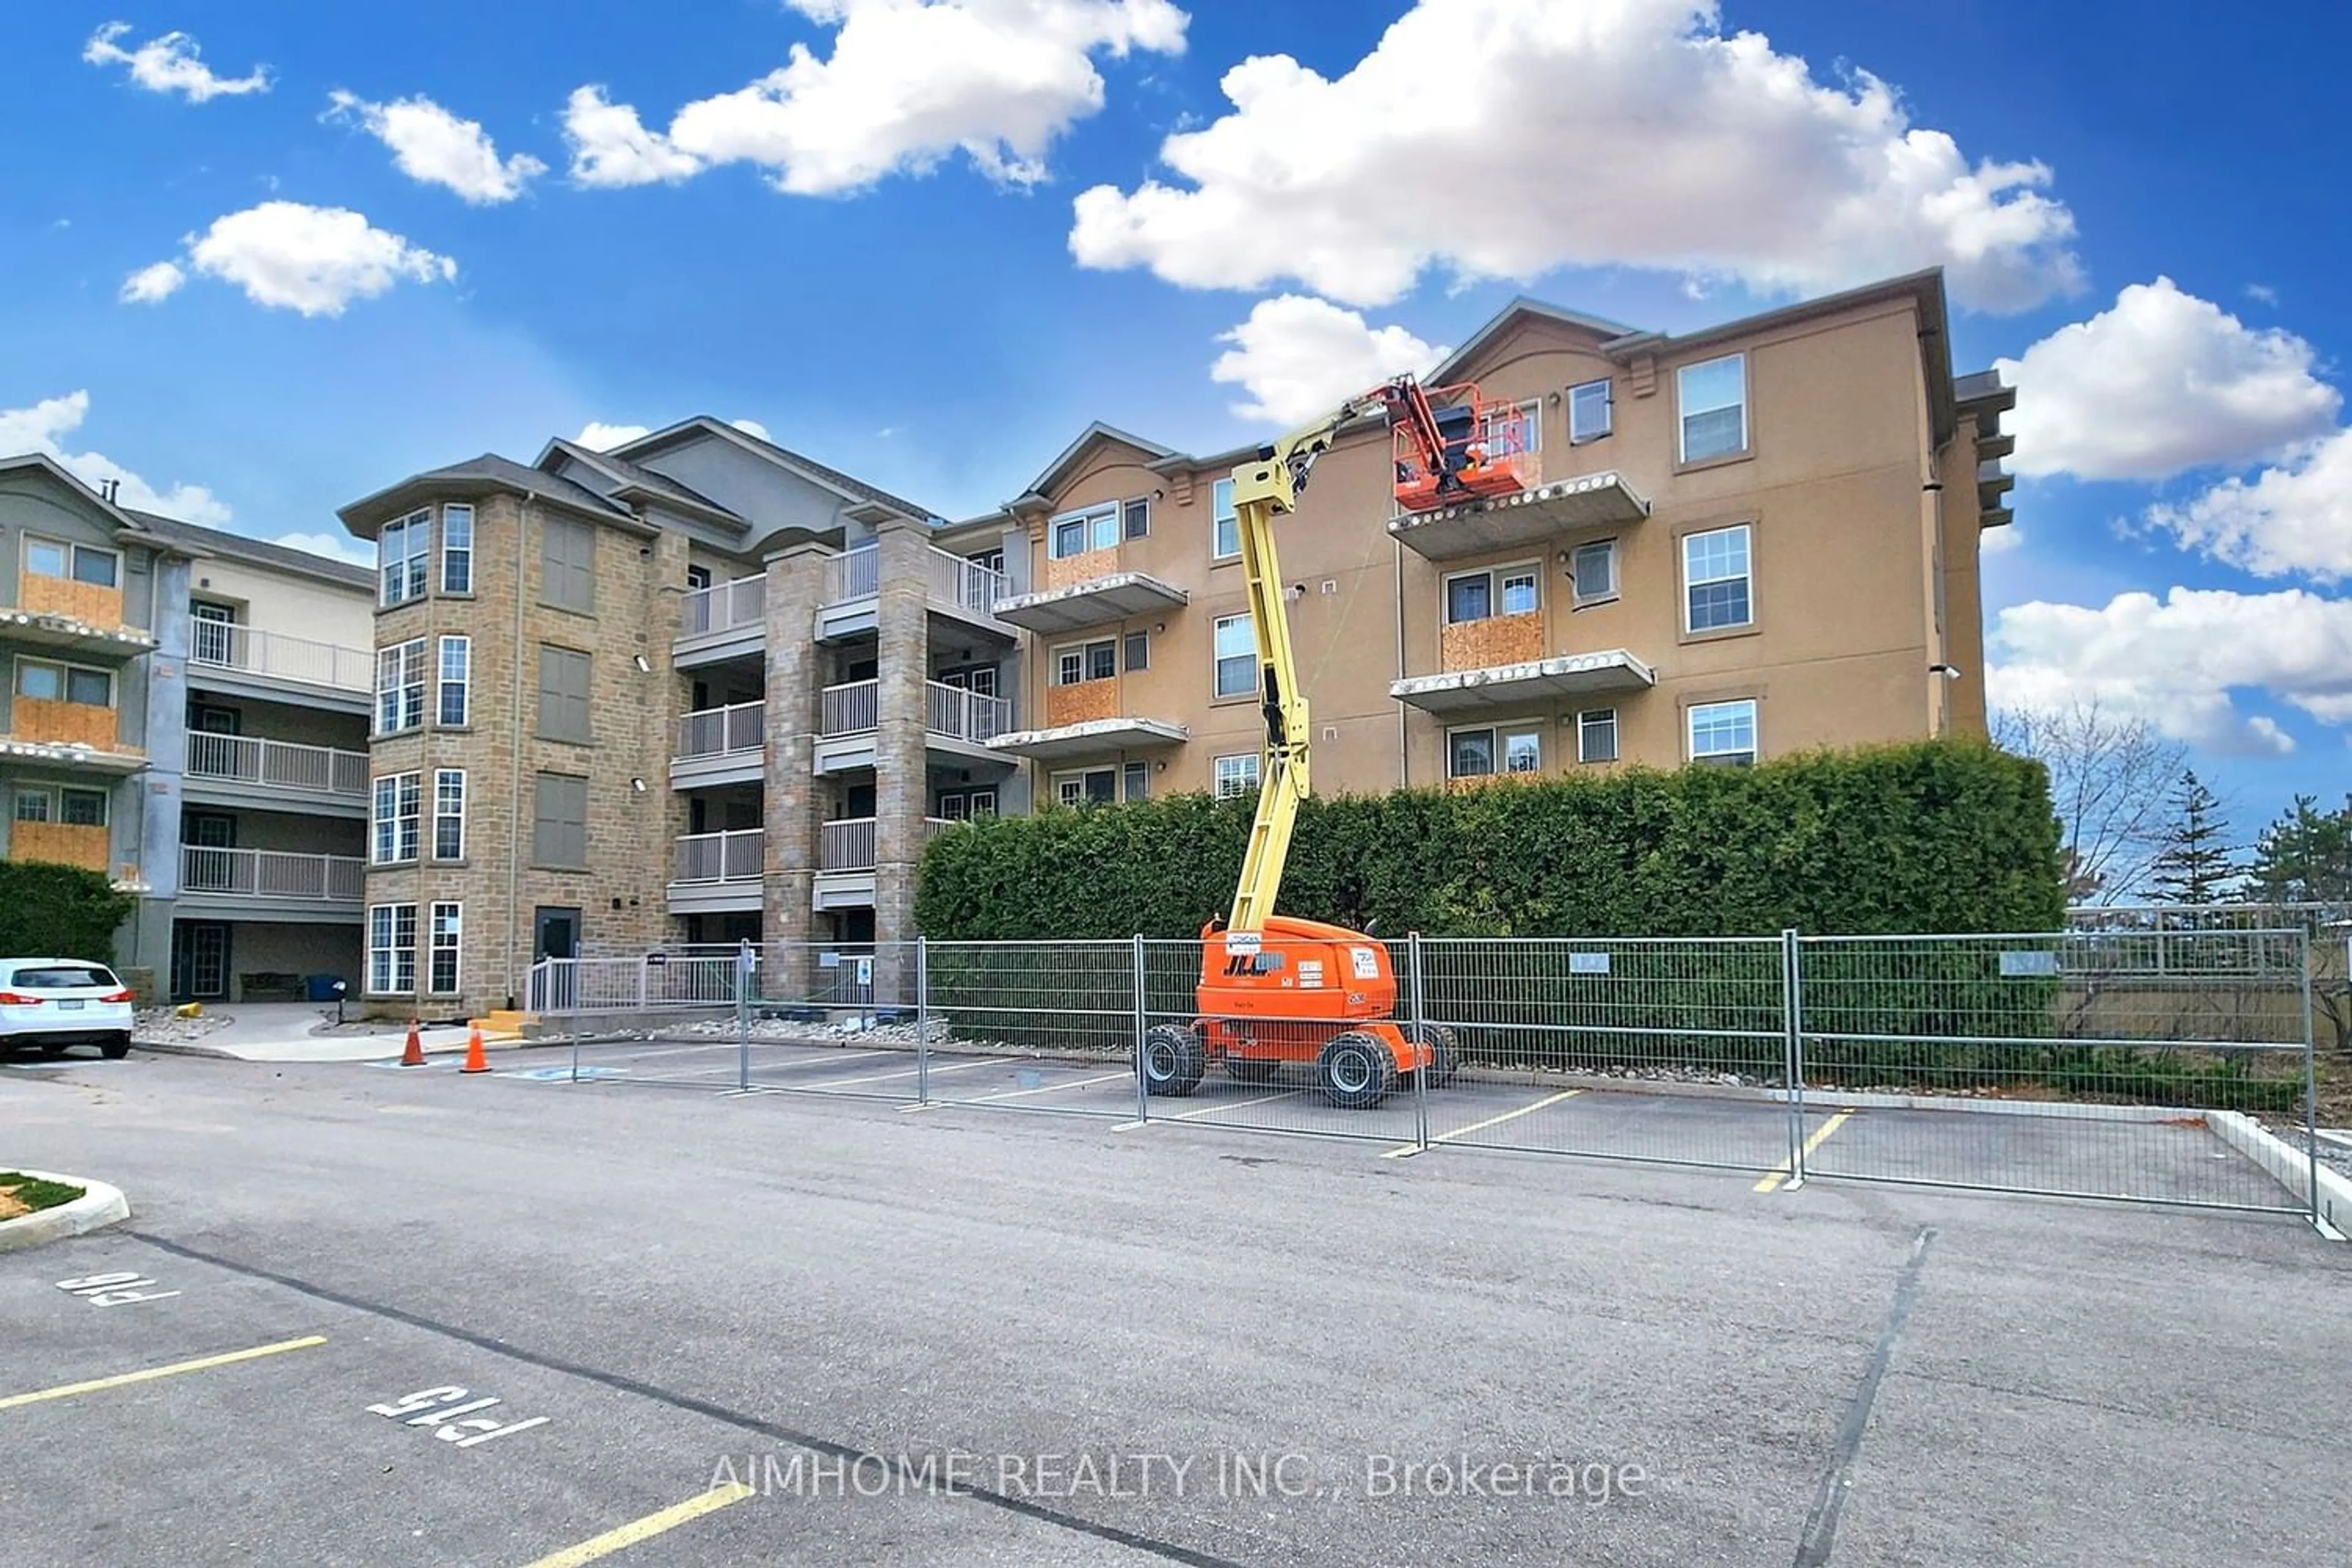 A pic from exterior of the house or condo for 1450 Bishops Gate #204, Oakville Ontario L6M 4M9